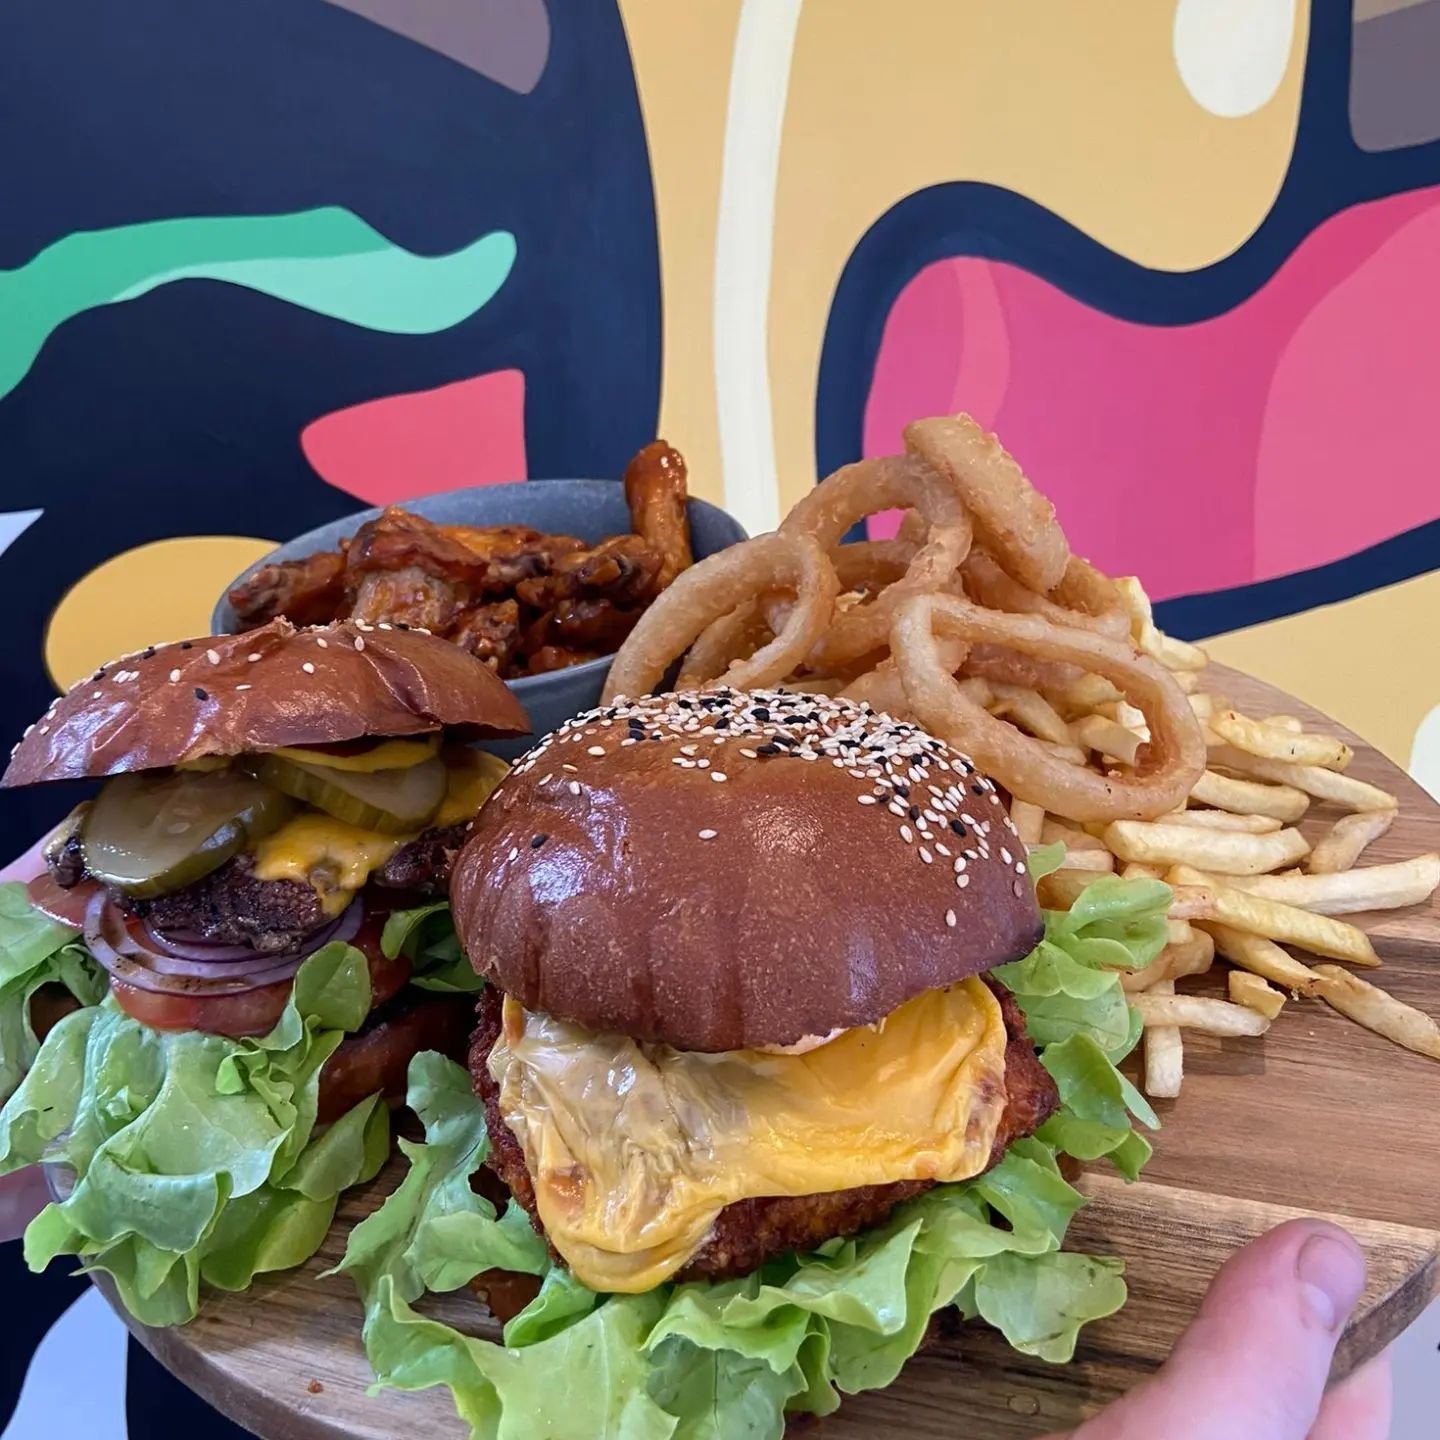 Dont forget about our Footy box for tonights game 🥳🏉🥳🏉

Available from first kick off until kitchen closes at 7:30

Pick up or free delivery! 

The box is designed for 2 people for $40 and consists of-

2 x any $15 burgers 
1 x large fries 
8 x w